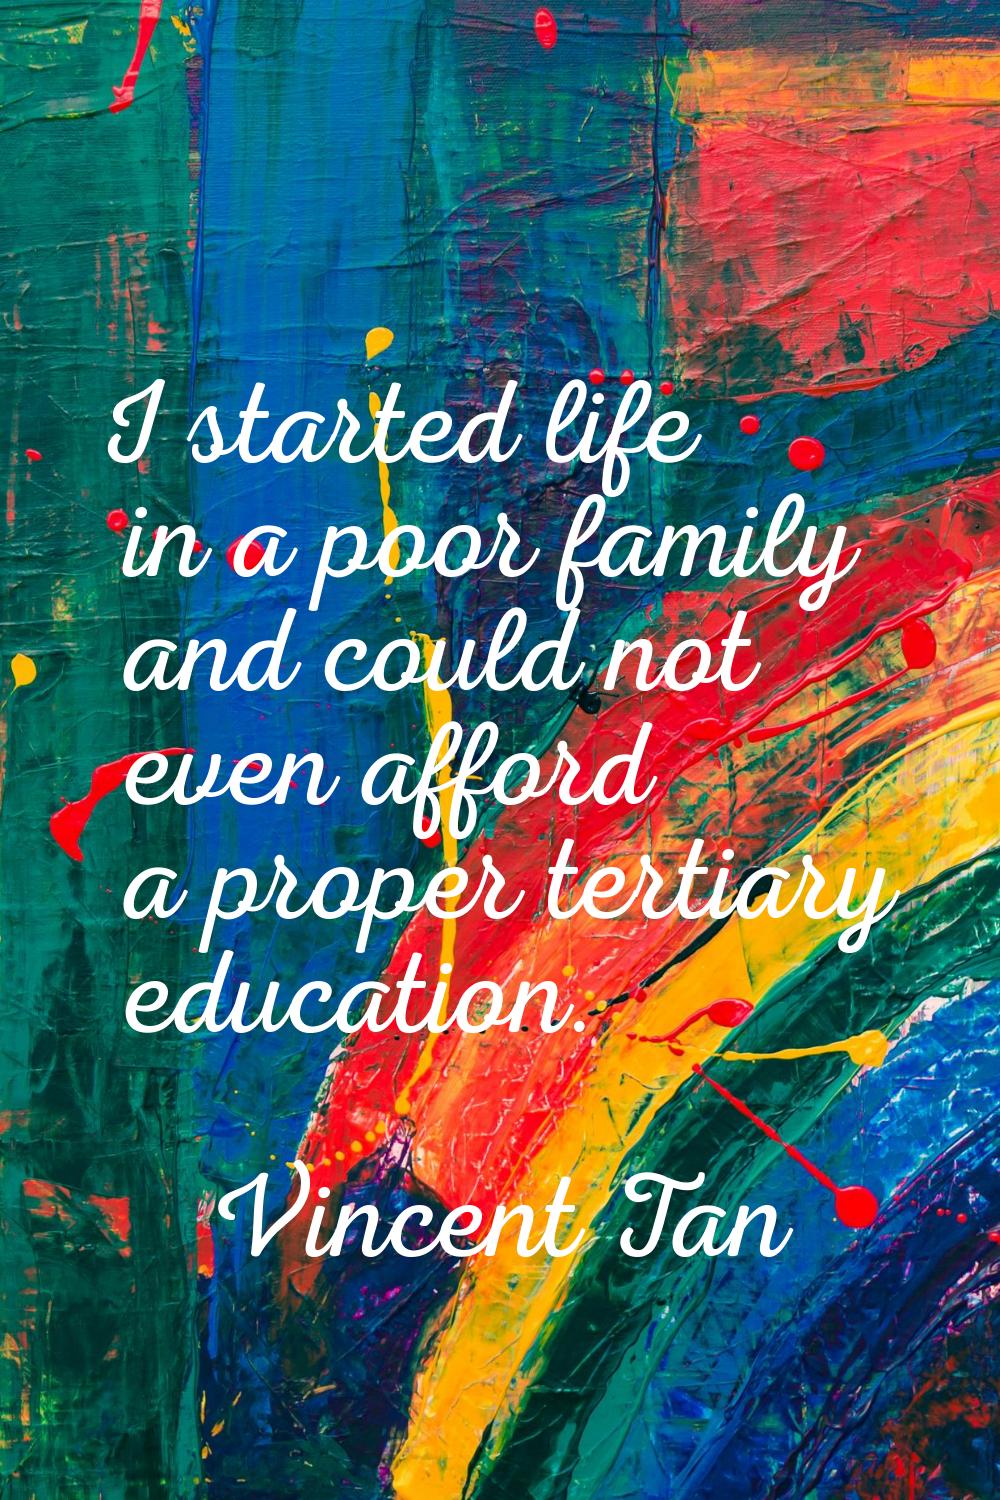 I started life in a poor family and could not even afford a proper tertiary education.